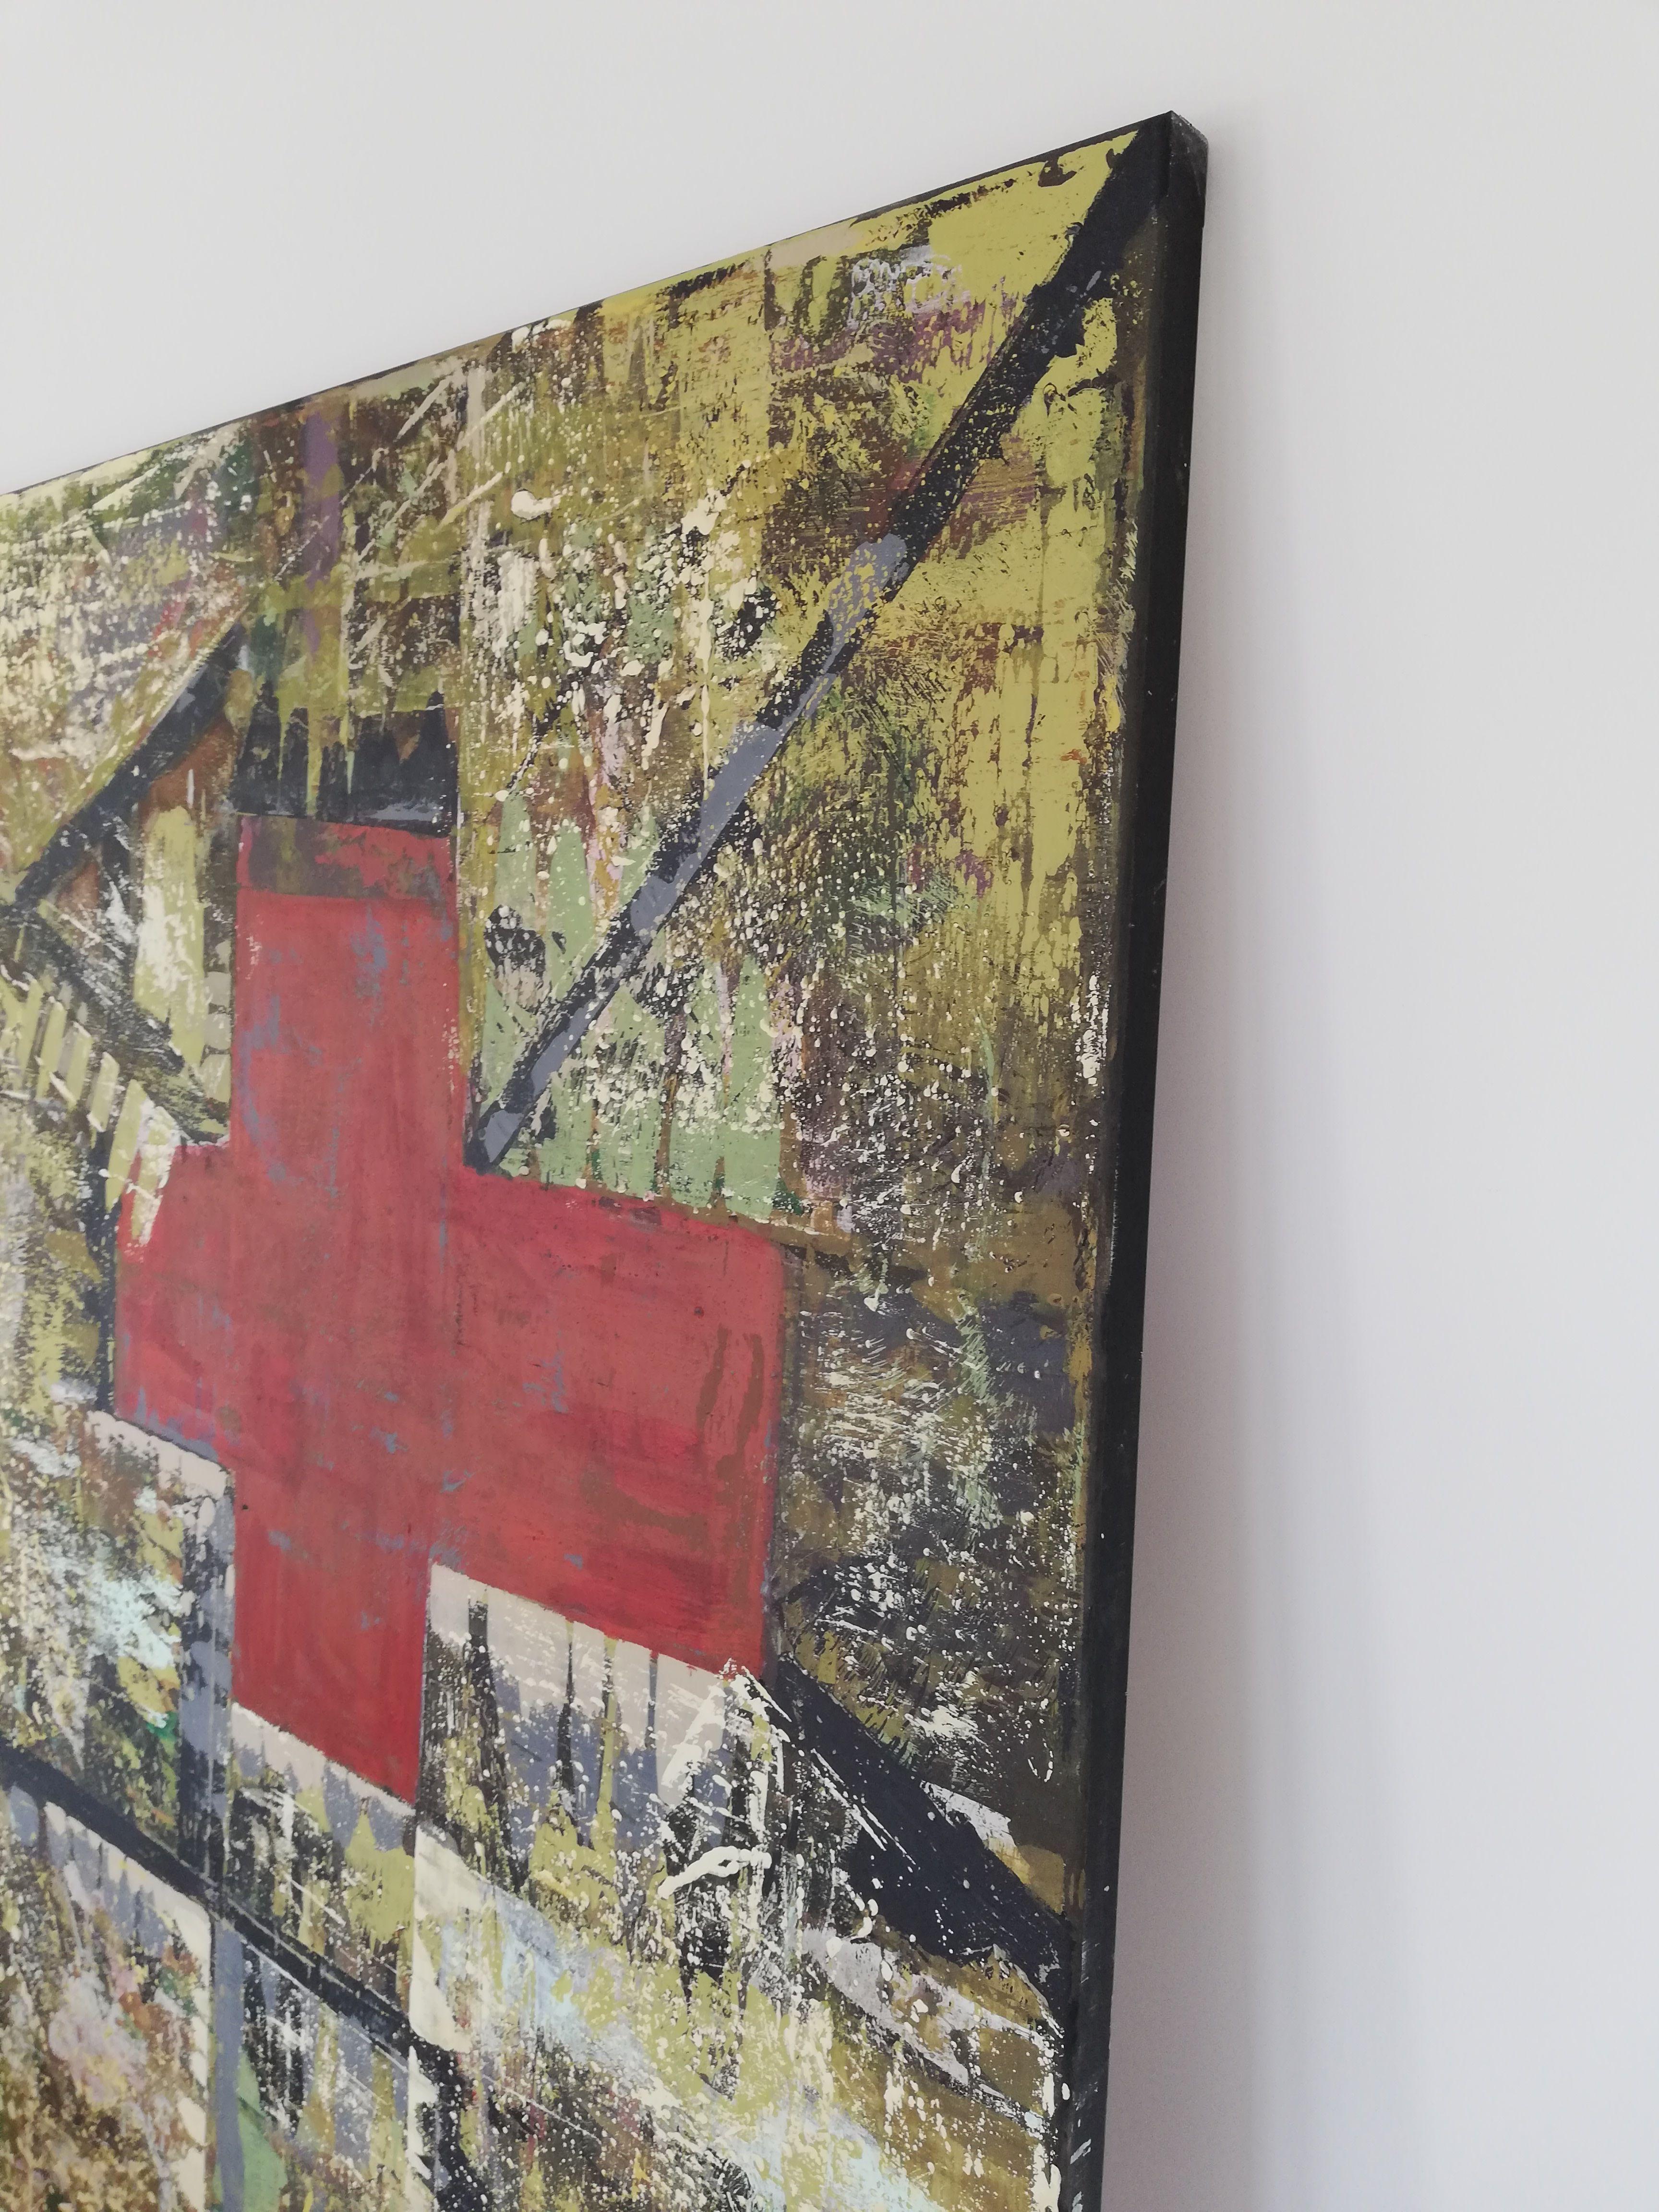 WORK CARRIED OUT FOLLOWING THE CURRENT OF ABSTRACT NON-CONFORMITY WITHIN ABSTRACT EXPRESSIONISM, A BOLD COMPOSITION GIVES THE RED COLOR OF THE CROSS HIGHLIGHTS ABOVE A RANGE OF COMPOSITE GREEN, IN SOME FORM IN ALL THE WORK OF THE MUCH SANIT AL